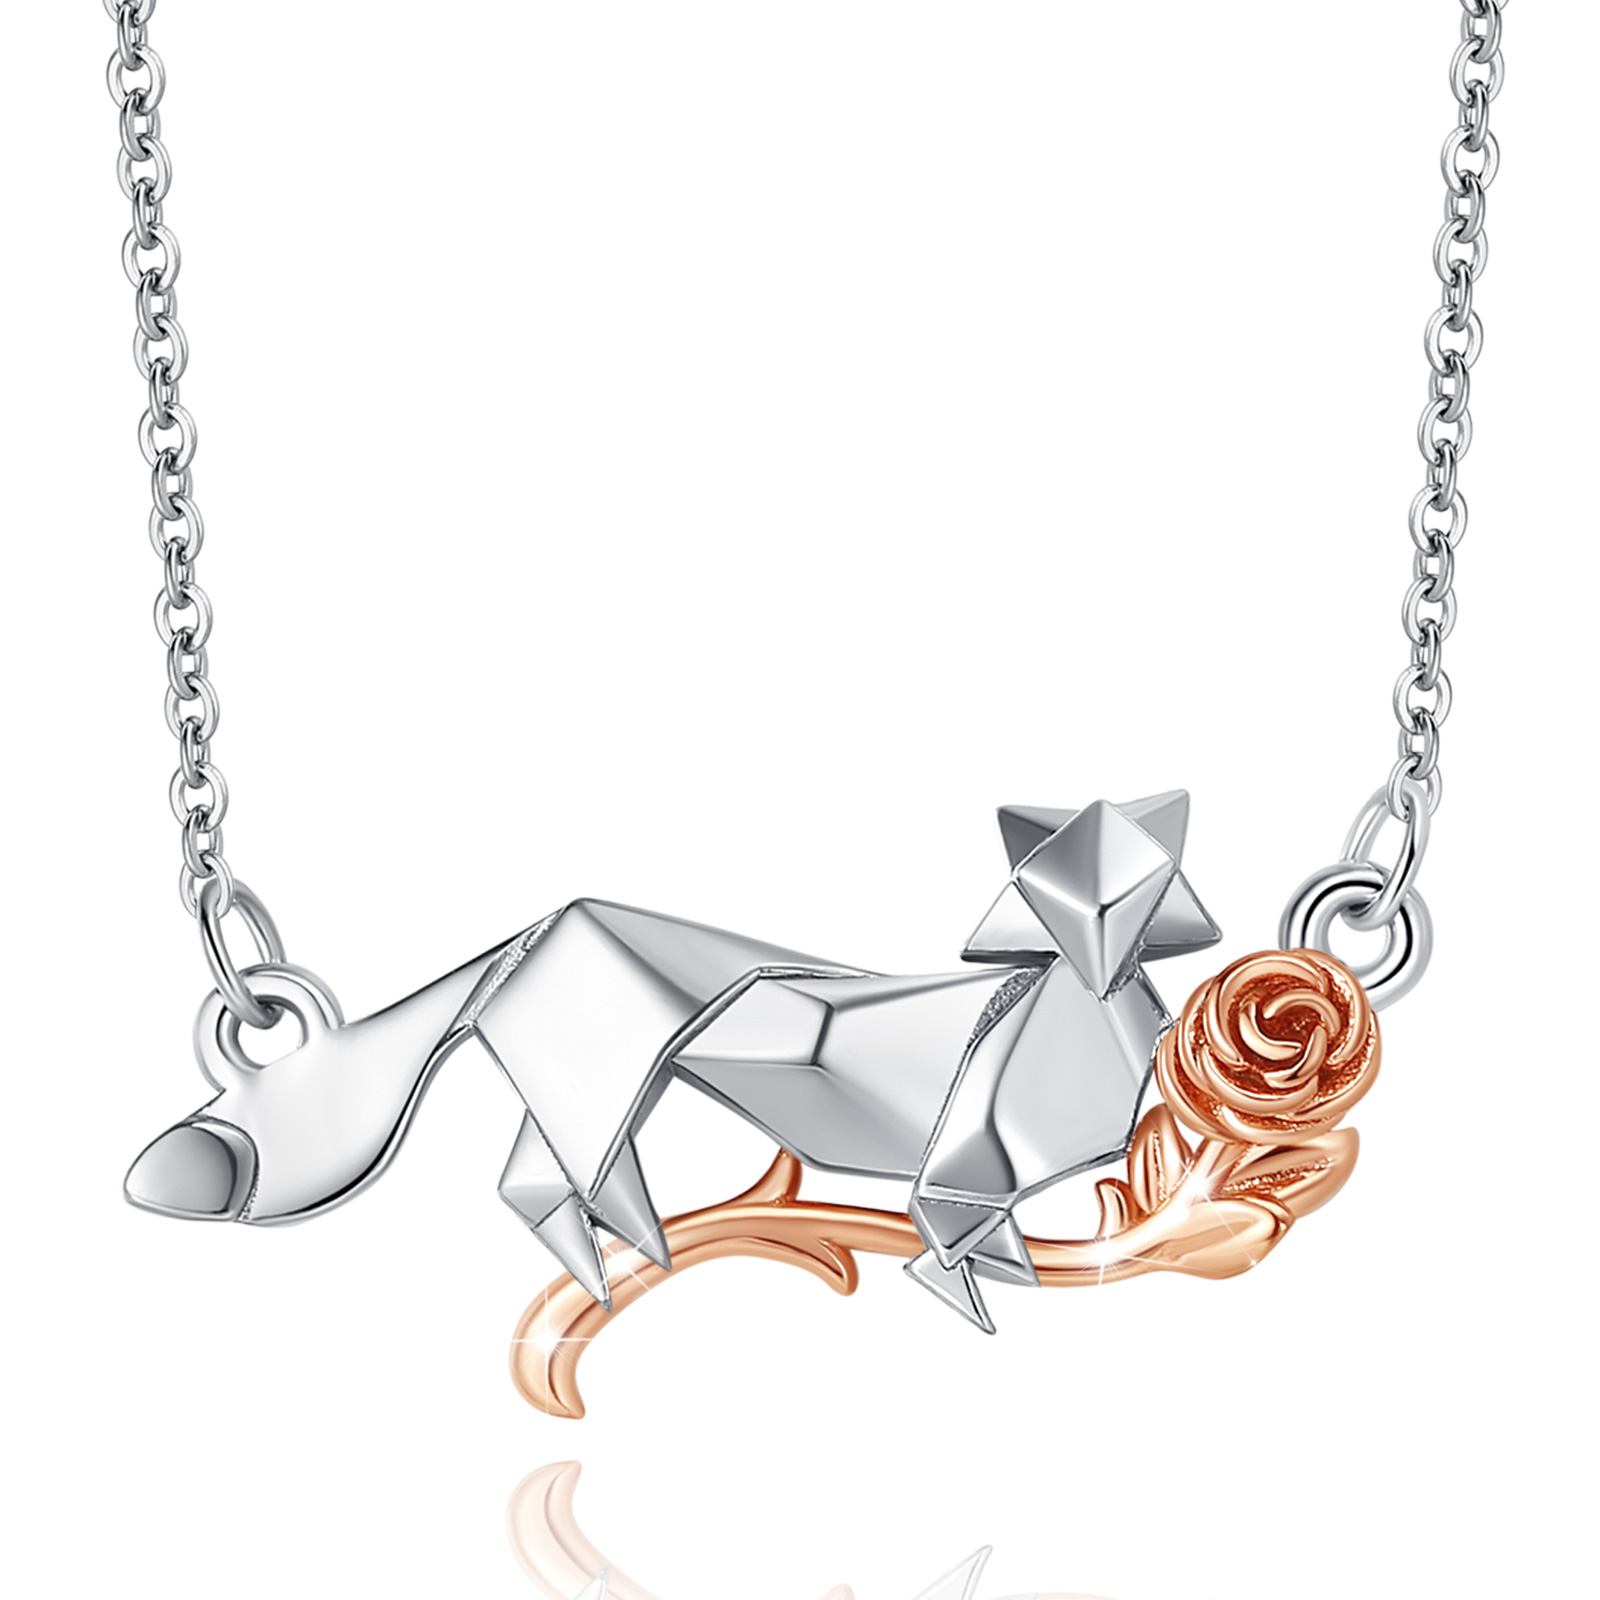 Merryshine Jewelry Origami Elements 925 Sterling Silver Fox and Flower Rose Pendant Necklace